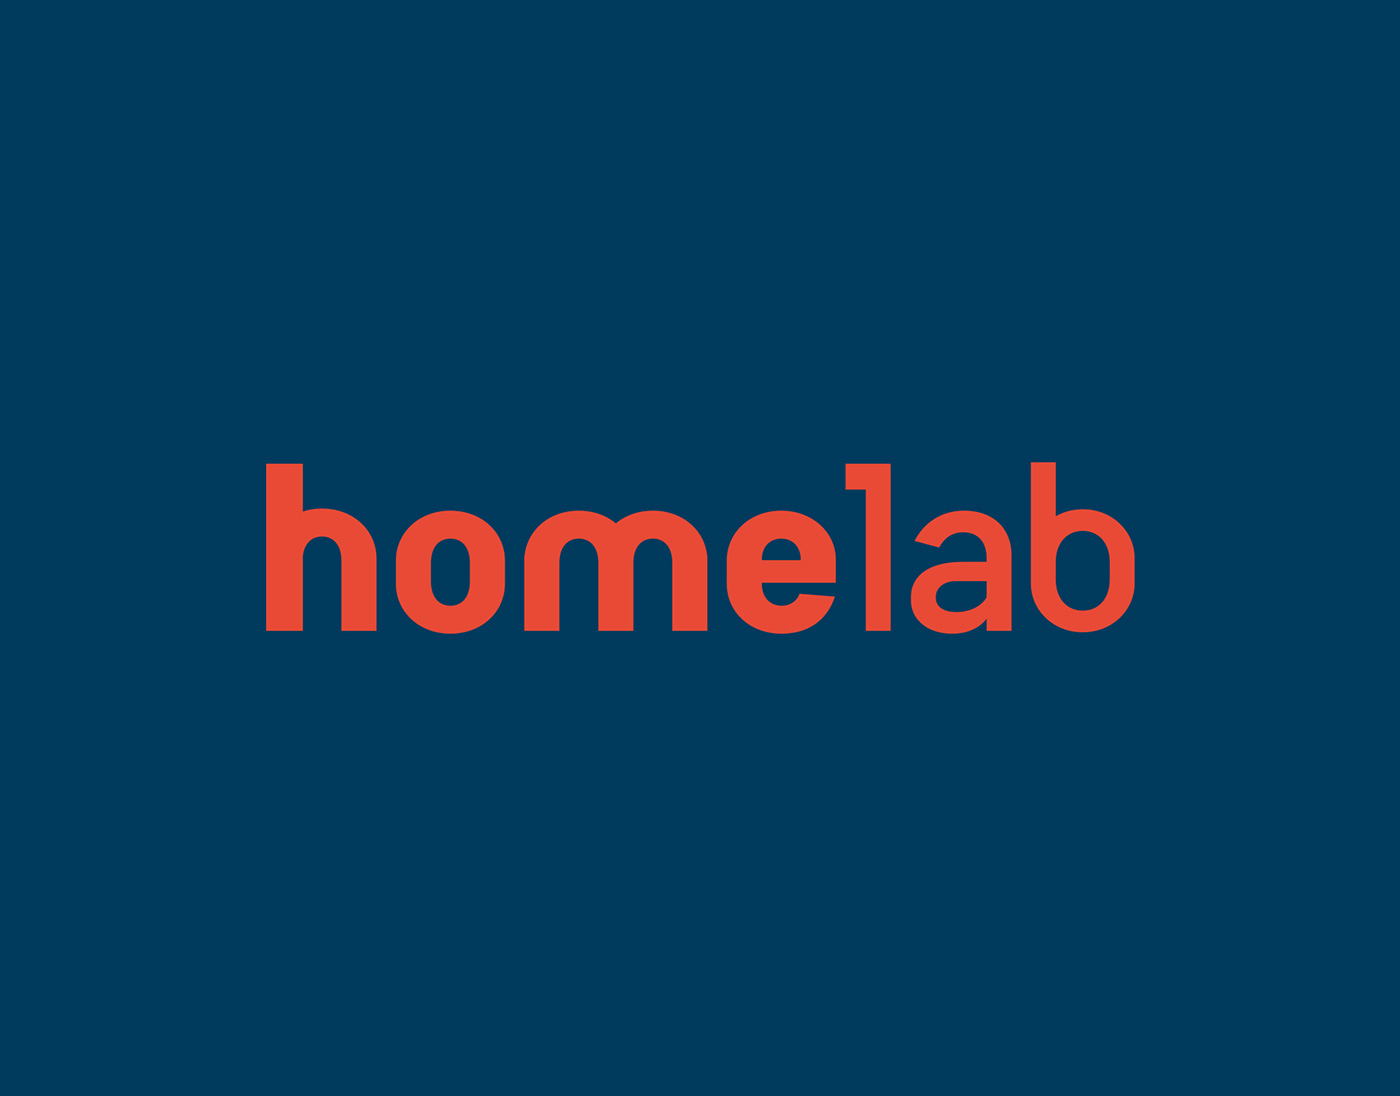 homelab arquitectura inmobiliaria real estate Archittecture logo Stationery Web